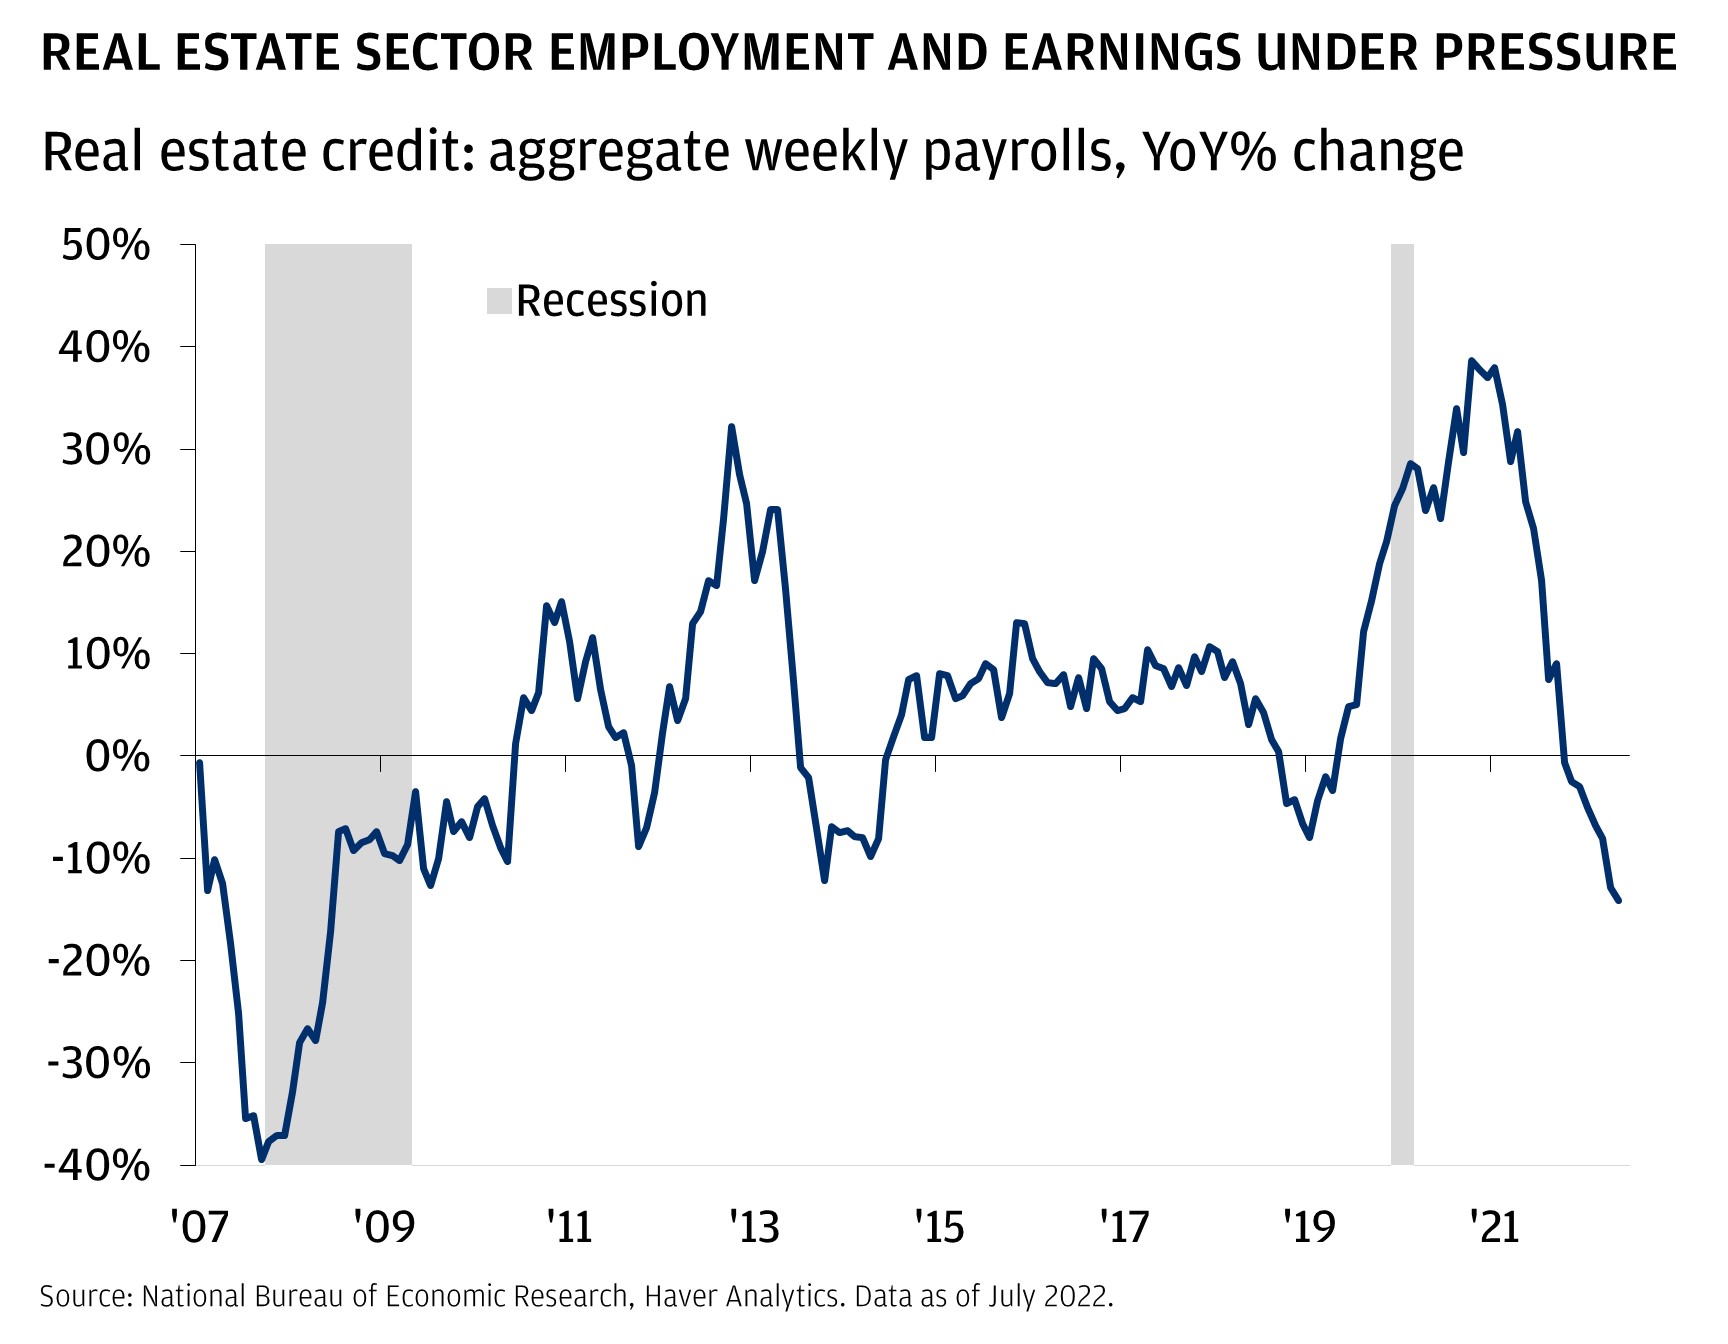 This chart shows real estate credit: aggregate weekly payrolls, YoY change from 2007 to 2022, as well as recession bars.